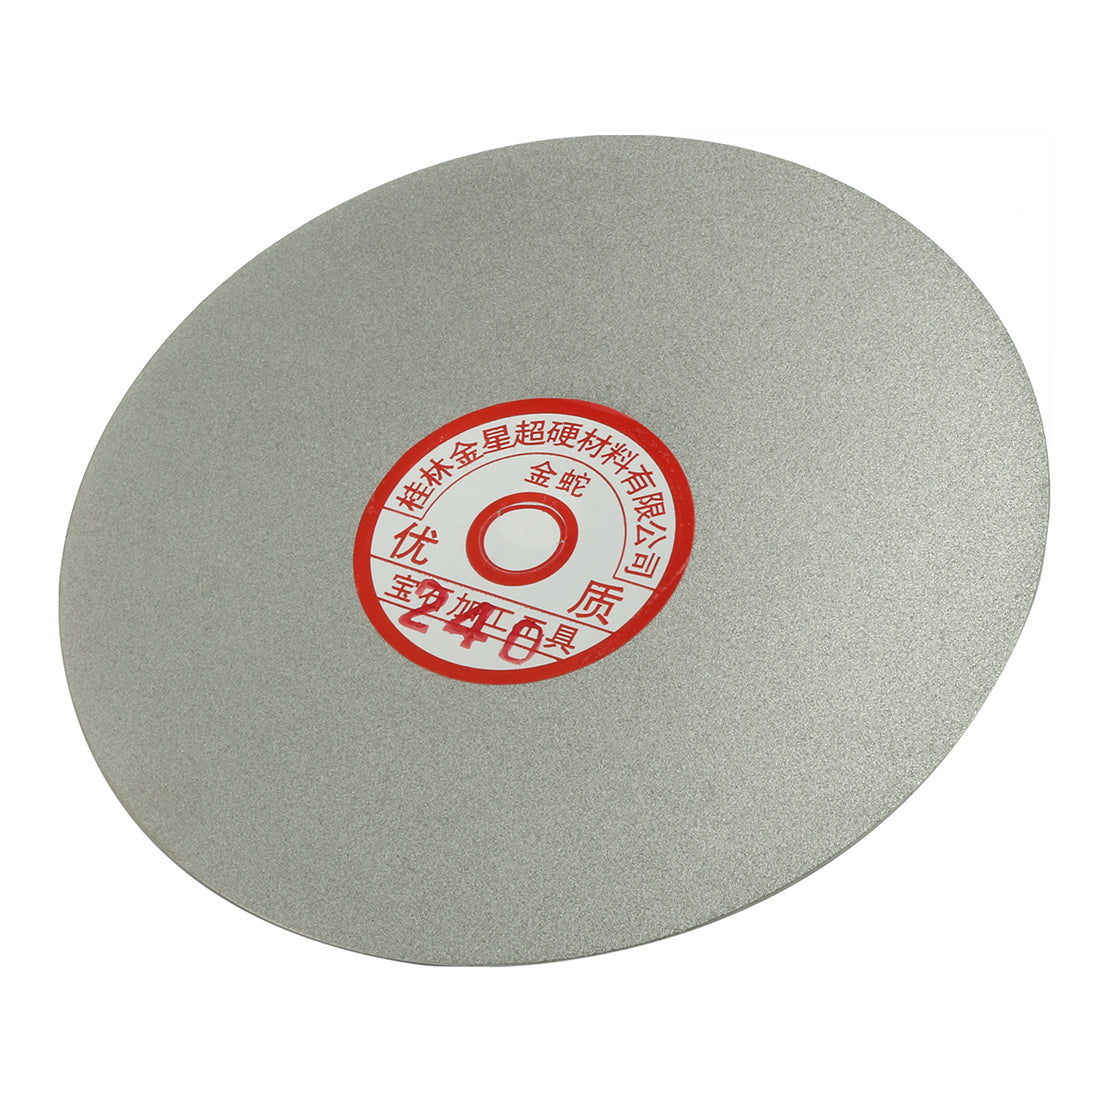 uxcell Uxcell 6-inch Grit 240 Diamond Coated Flat Lap Wheel Grinding Sanding Polishing Disc